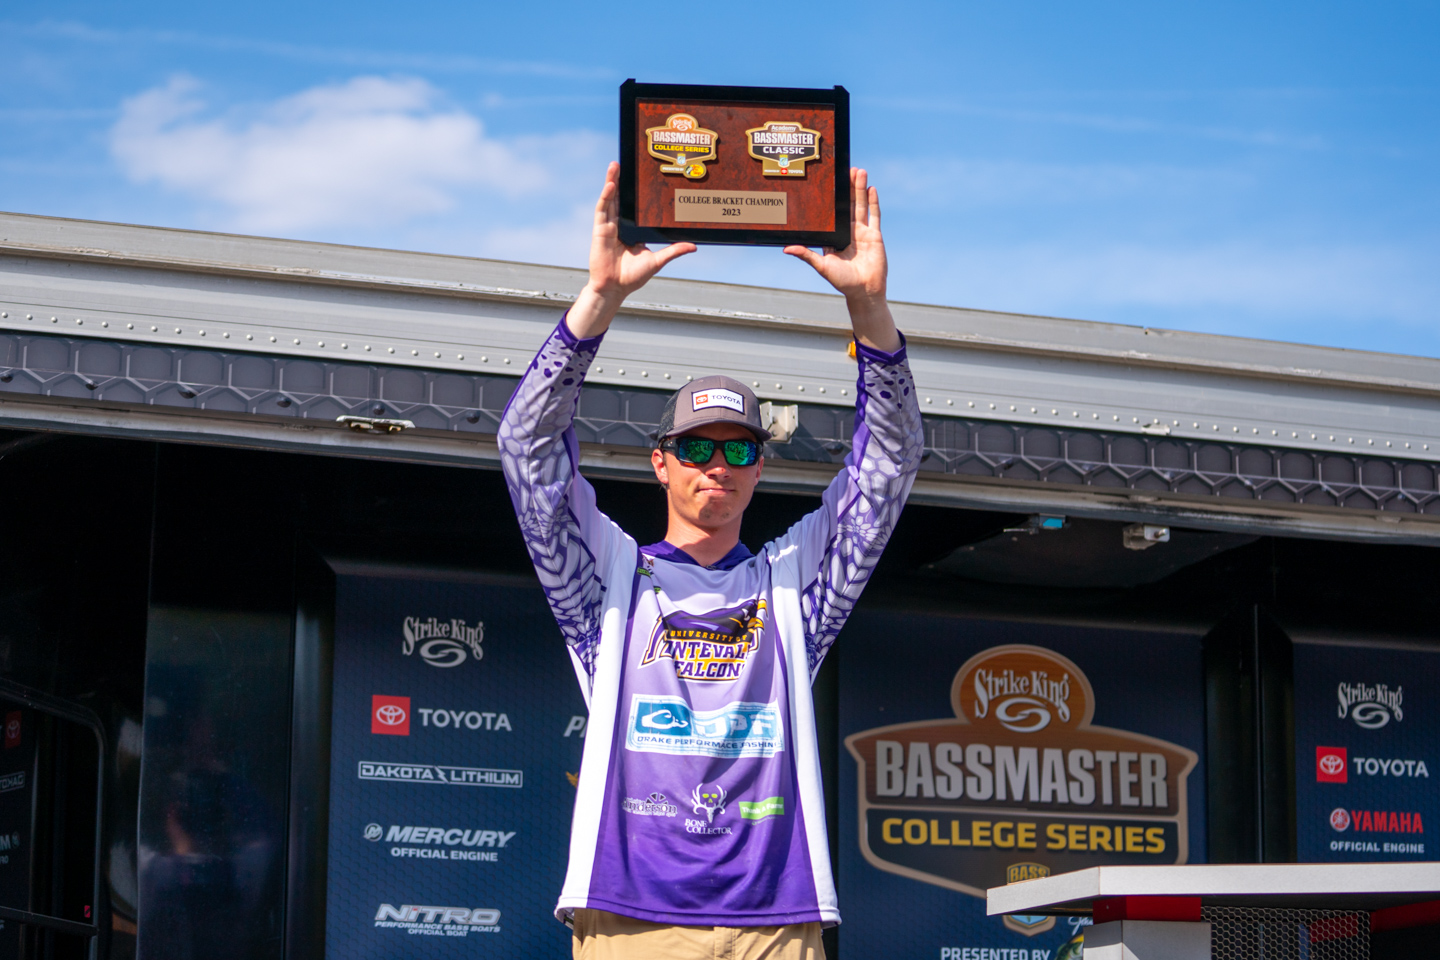 Fothergill fights his way to College Classic Bracket win - Bassmaster